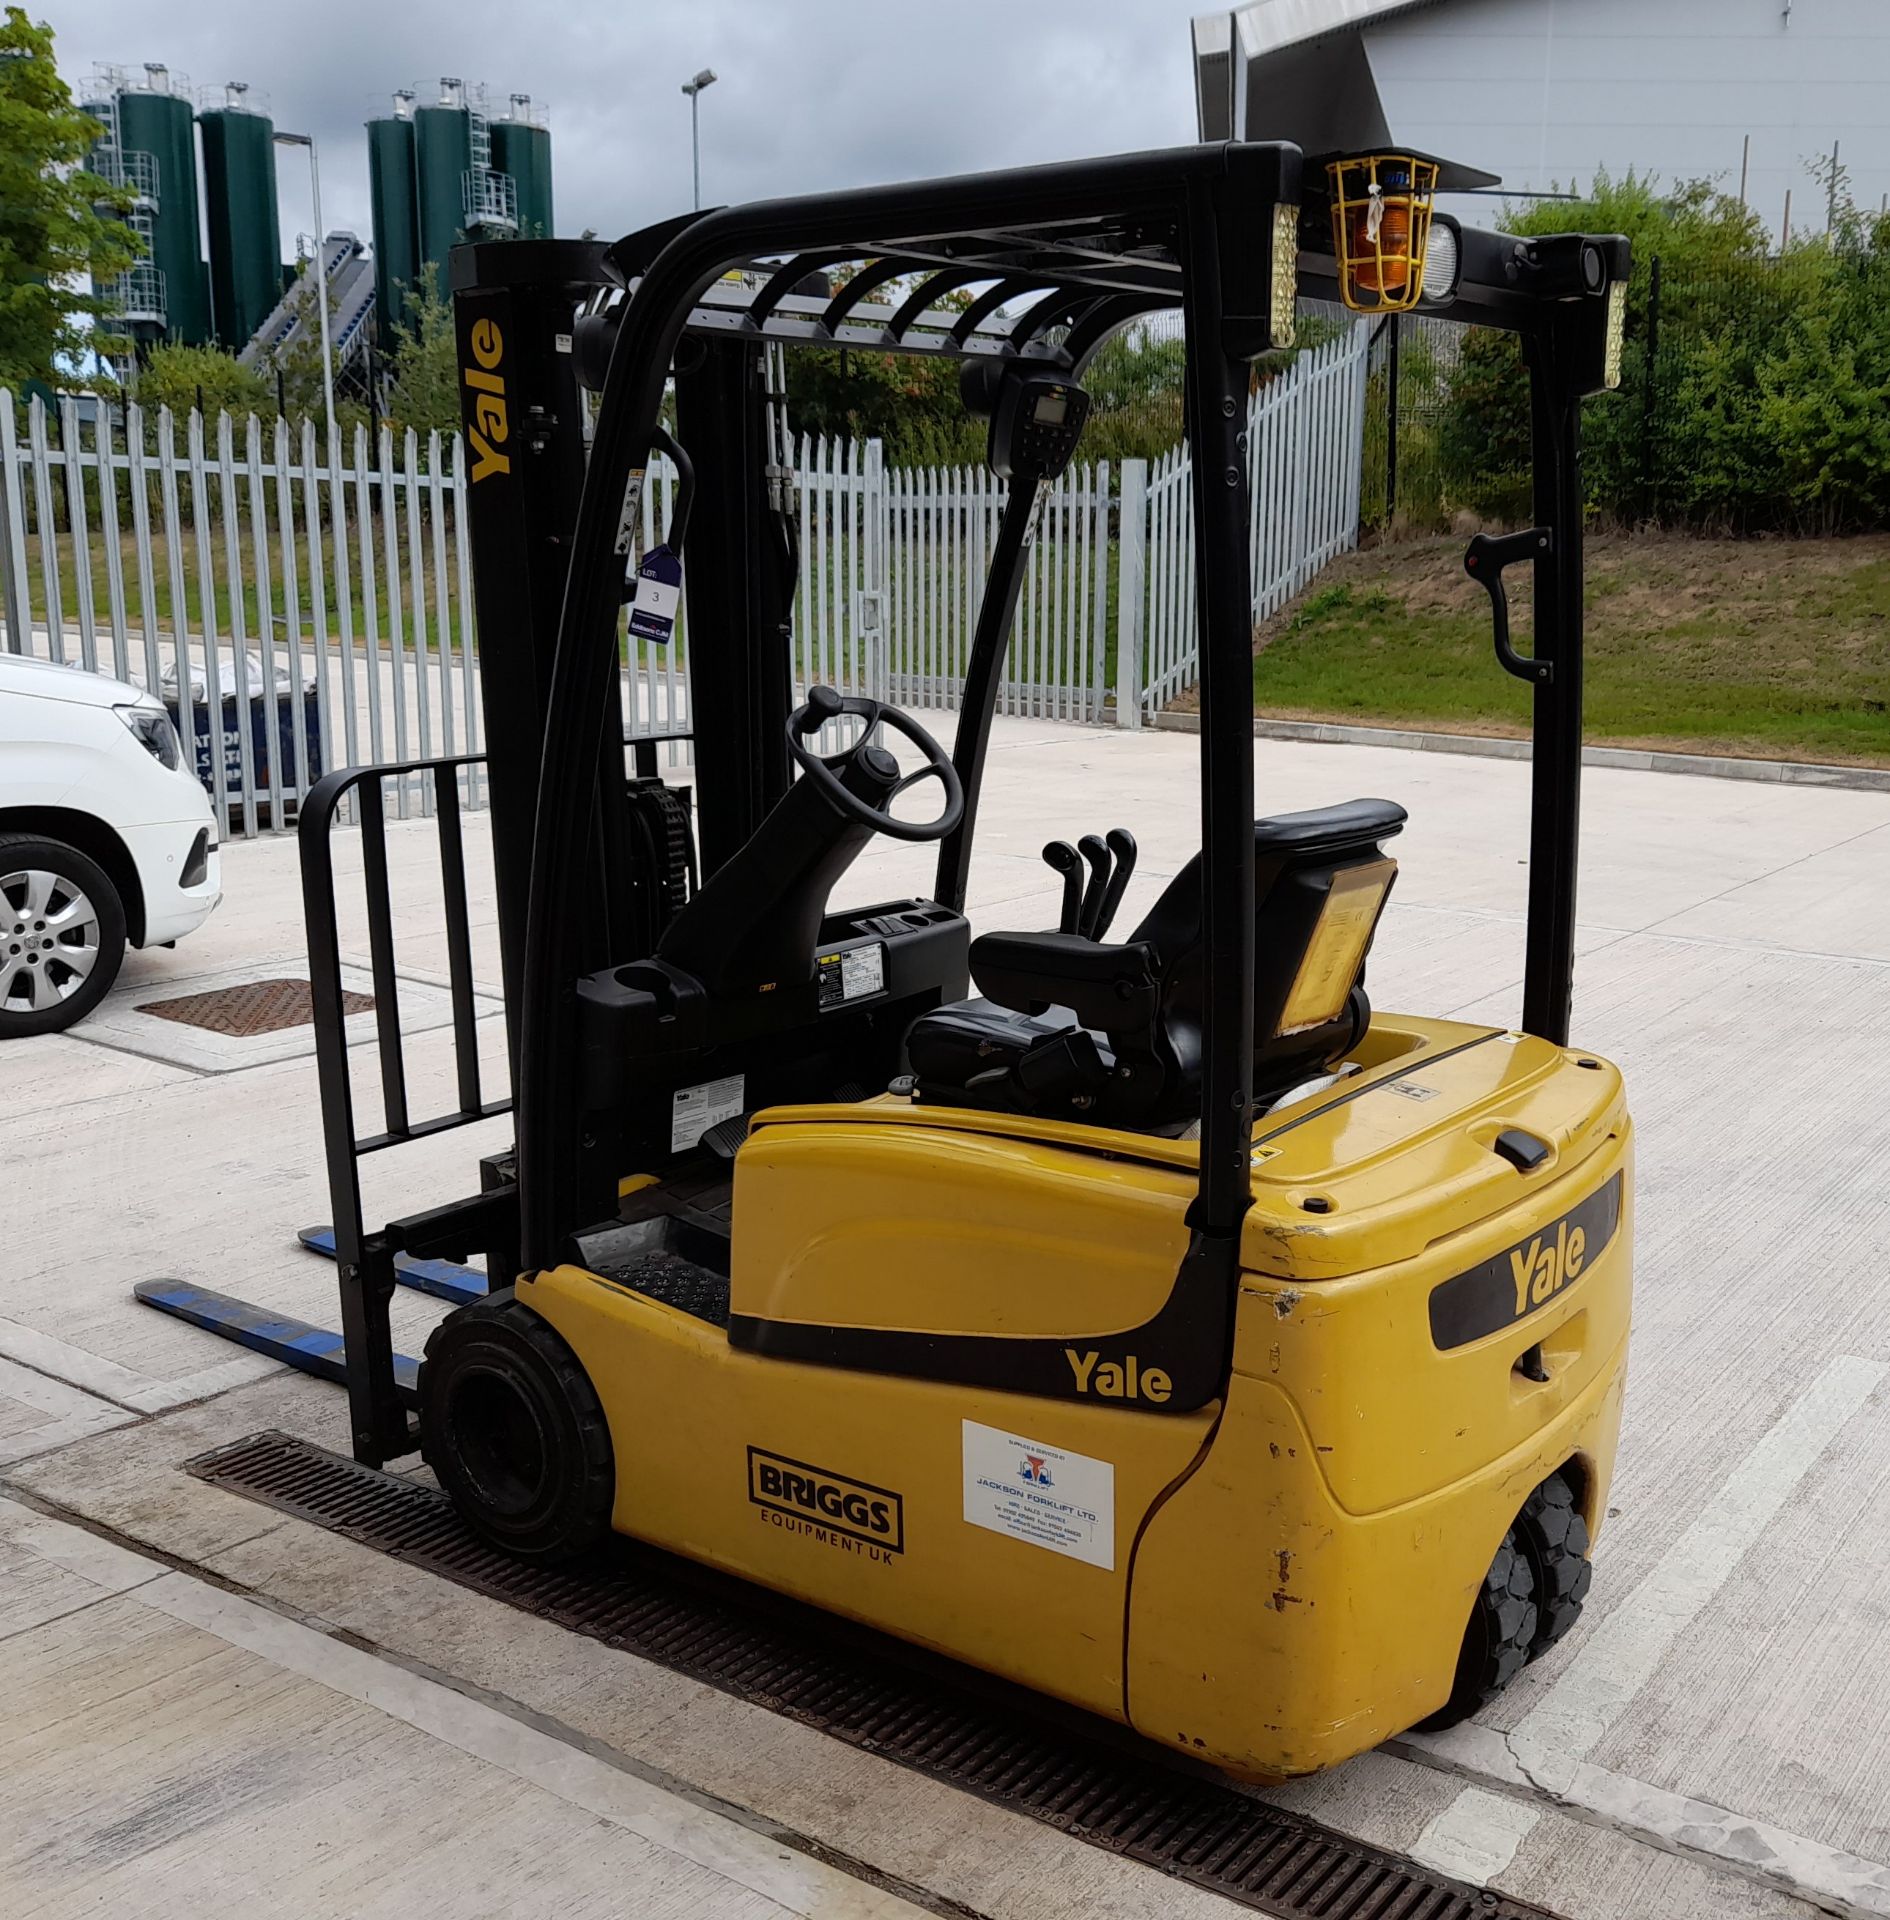 Yale ERP18VT MWBF2080 1.8tonne capacity Electric Forklift Truck, serial number G807B02410H (2010), - Image 2 of 17